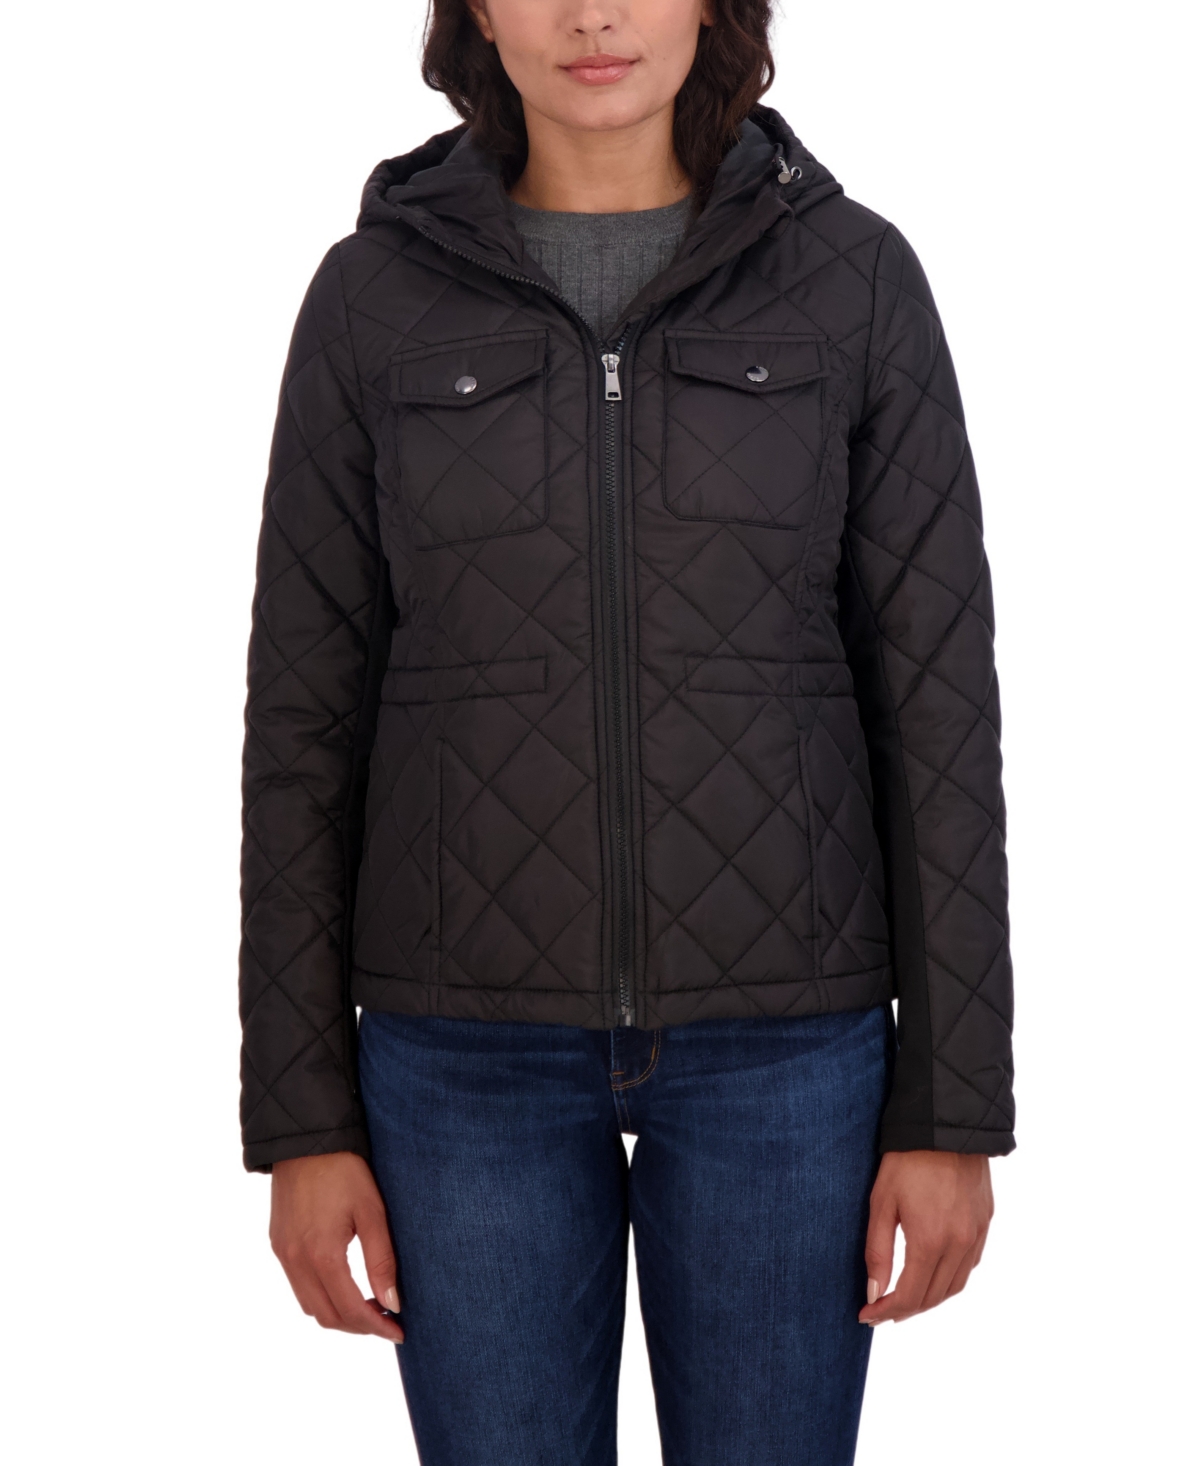 Women's Sebby Junior's Quilted Jacket with Hood - Sage